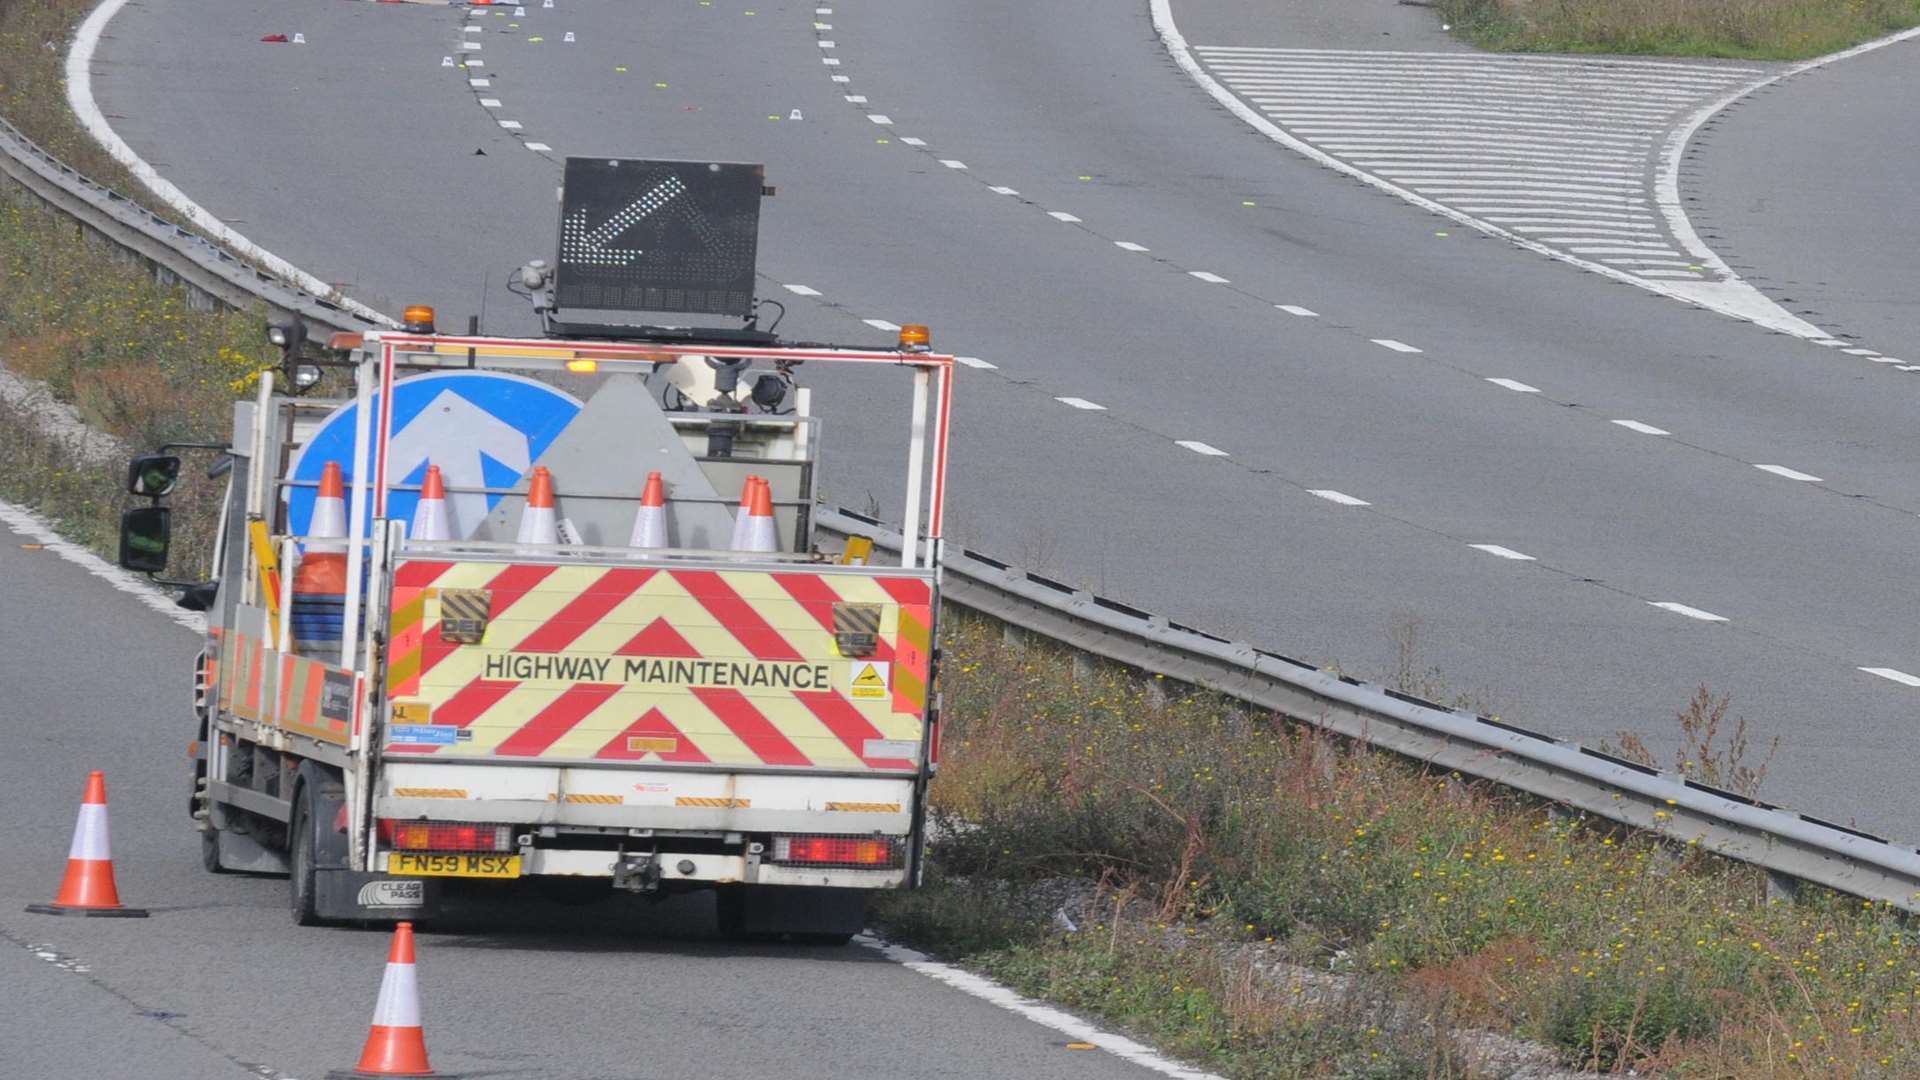 The scene of the fatal crash on the M20